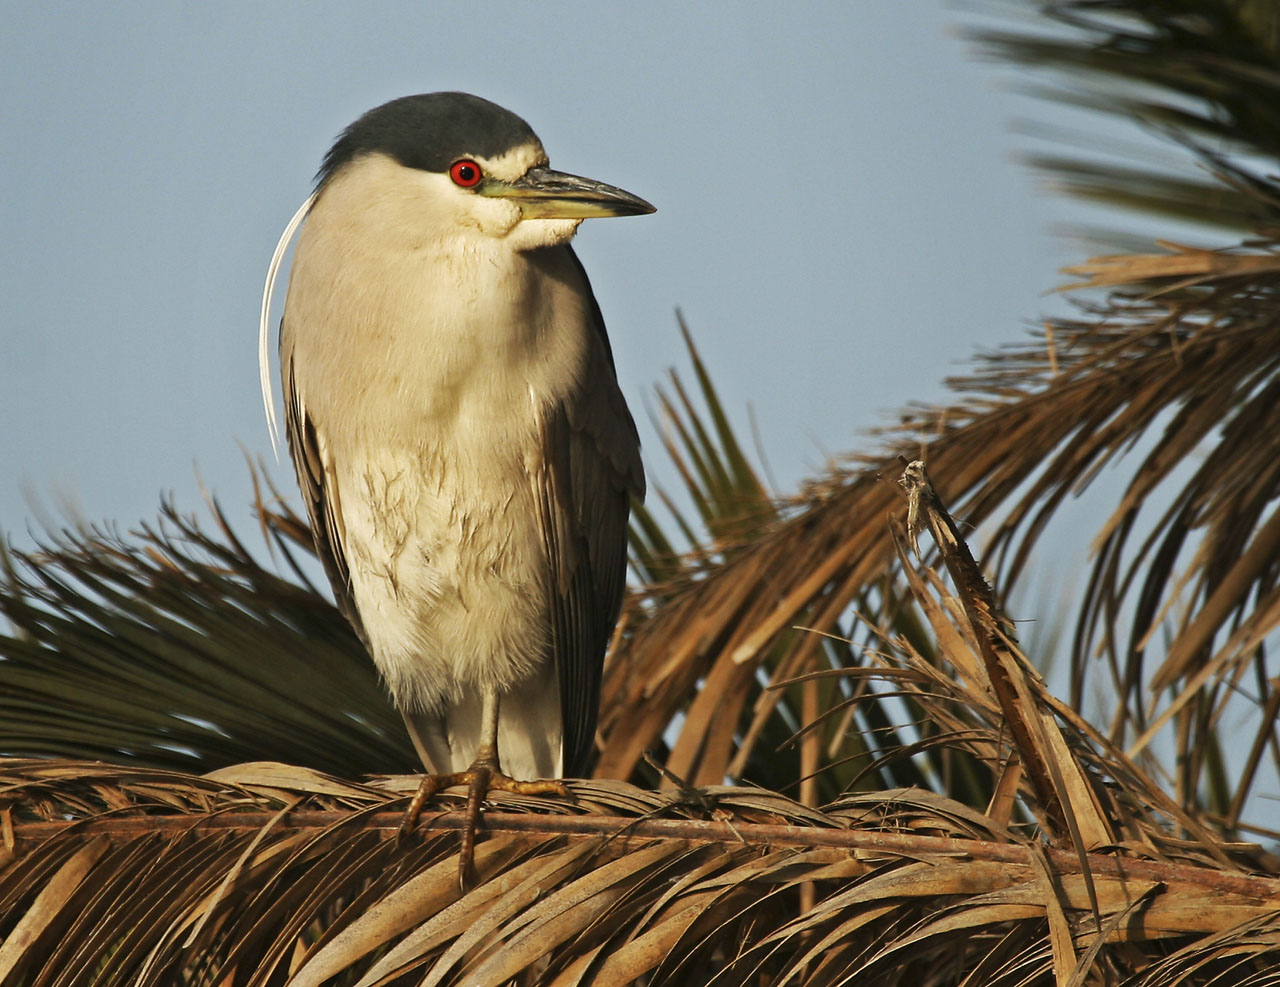 Black Crowned Night Heron Watches from Nesting Tree (Nycticorax nycticorax)